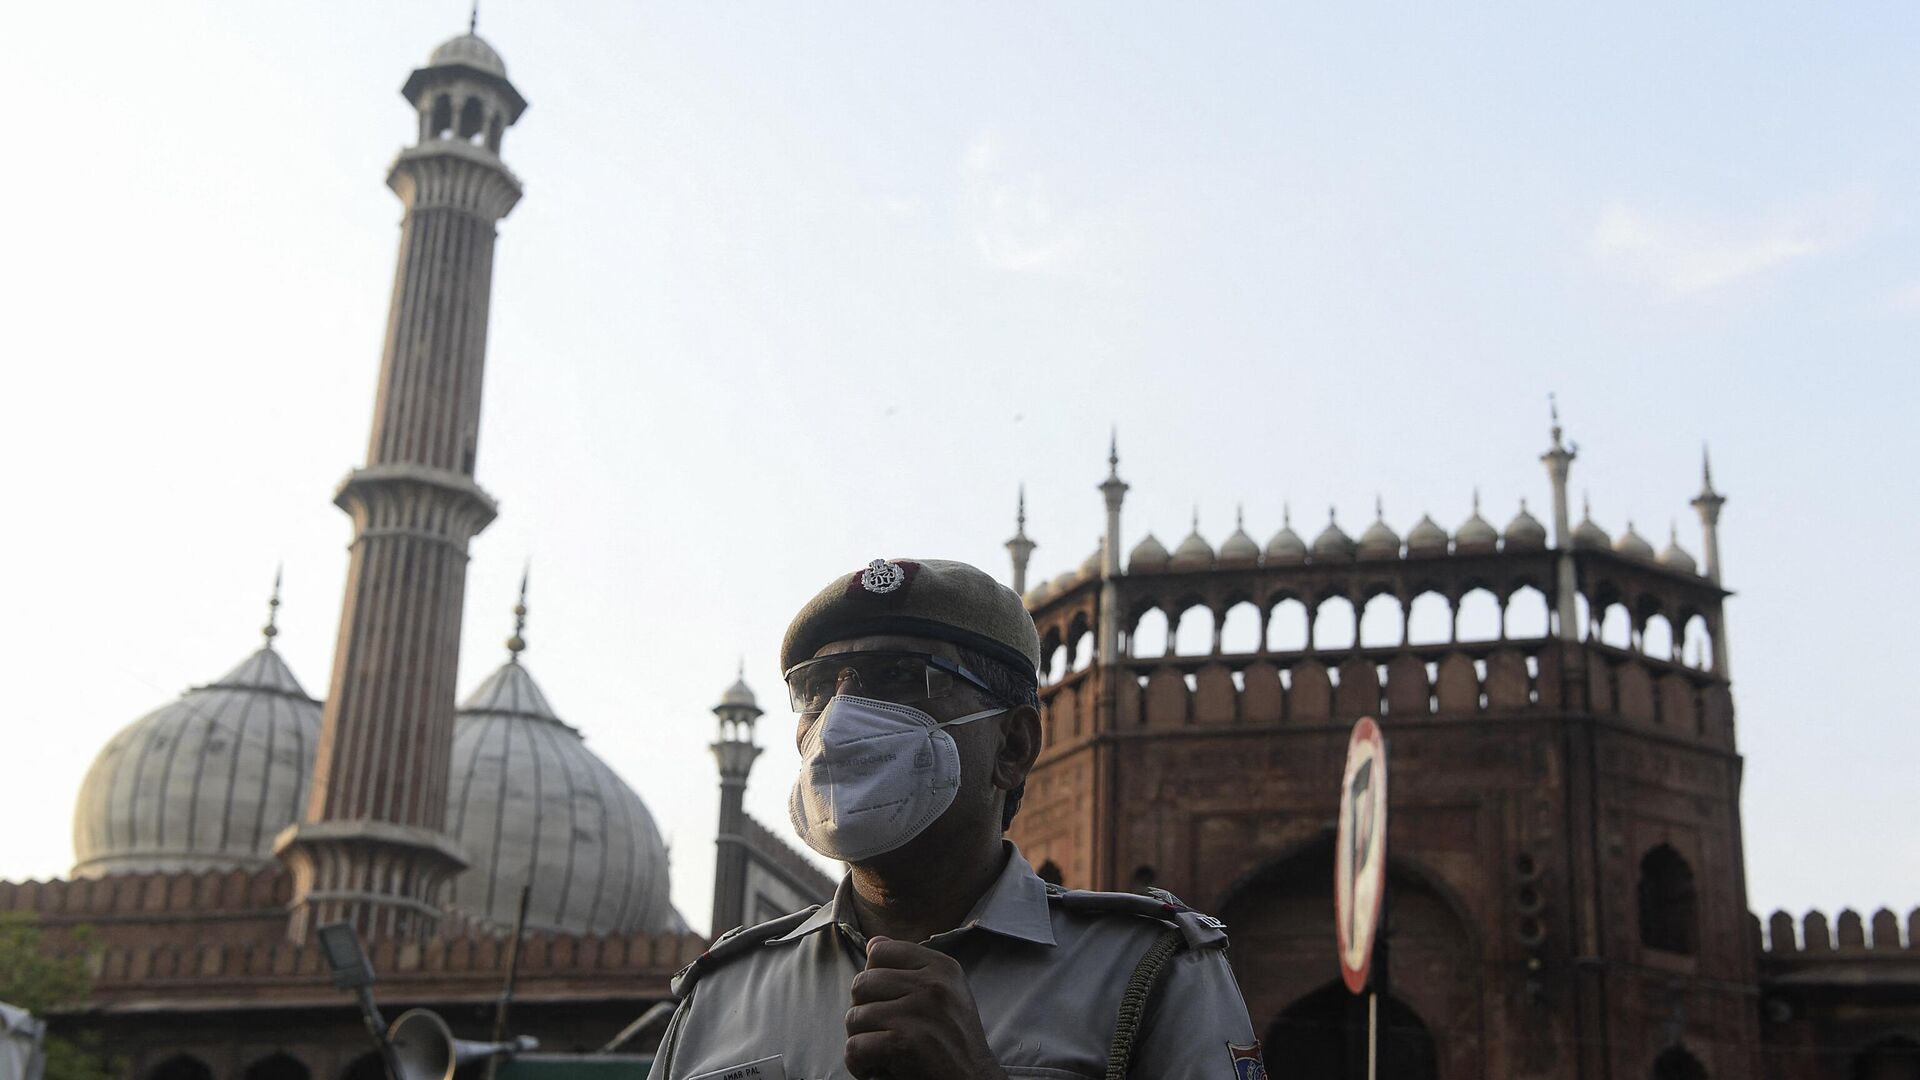 A police officer stands guard outside Jama Masjid during a government-imposed nationwide lockdown as a preventive measure against the spread of the COVID-19 coronavirus, in the old quarters of New Delhi on April 25, 2020. (Photo by SAJJAD HUSSAIN / AFP) - Sputnik India, 1920, 19.01.2023